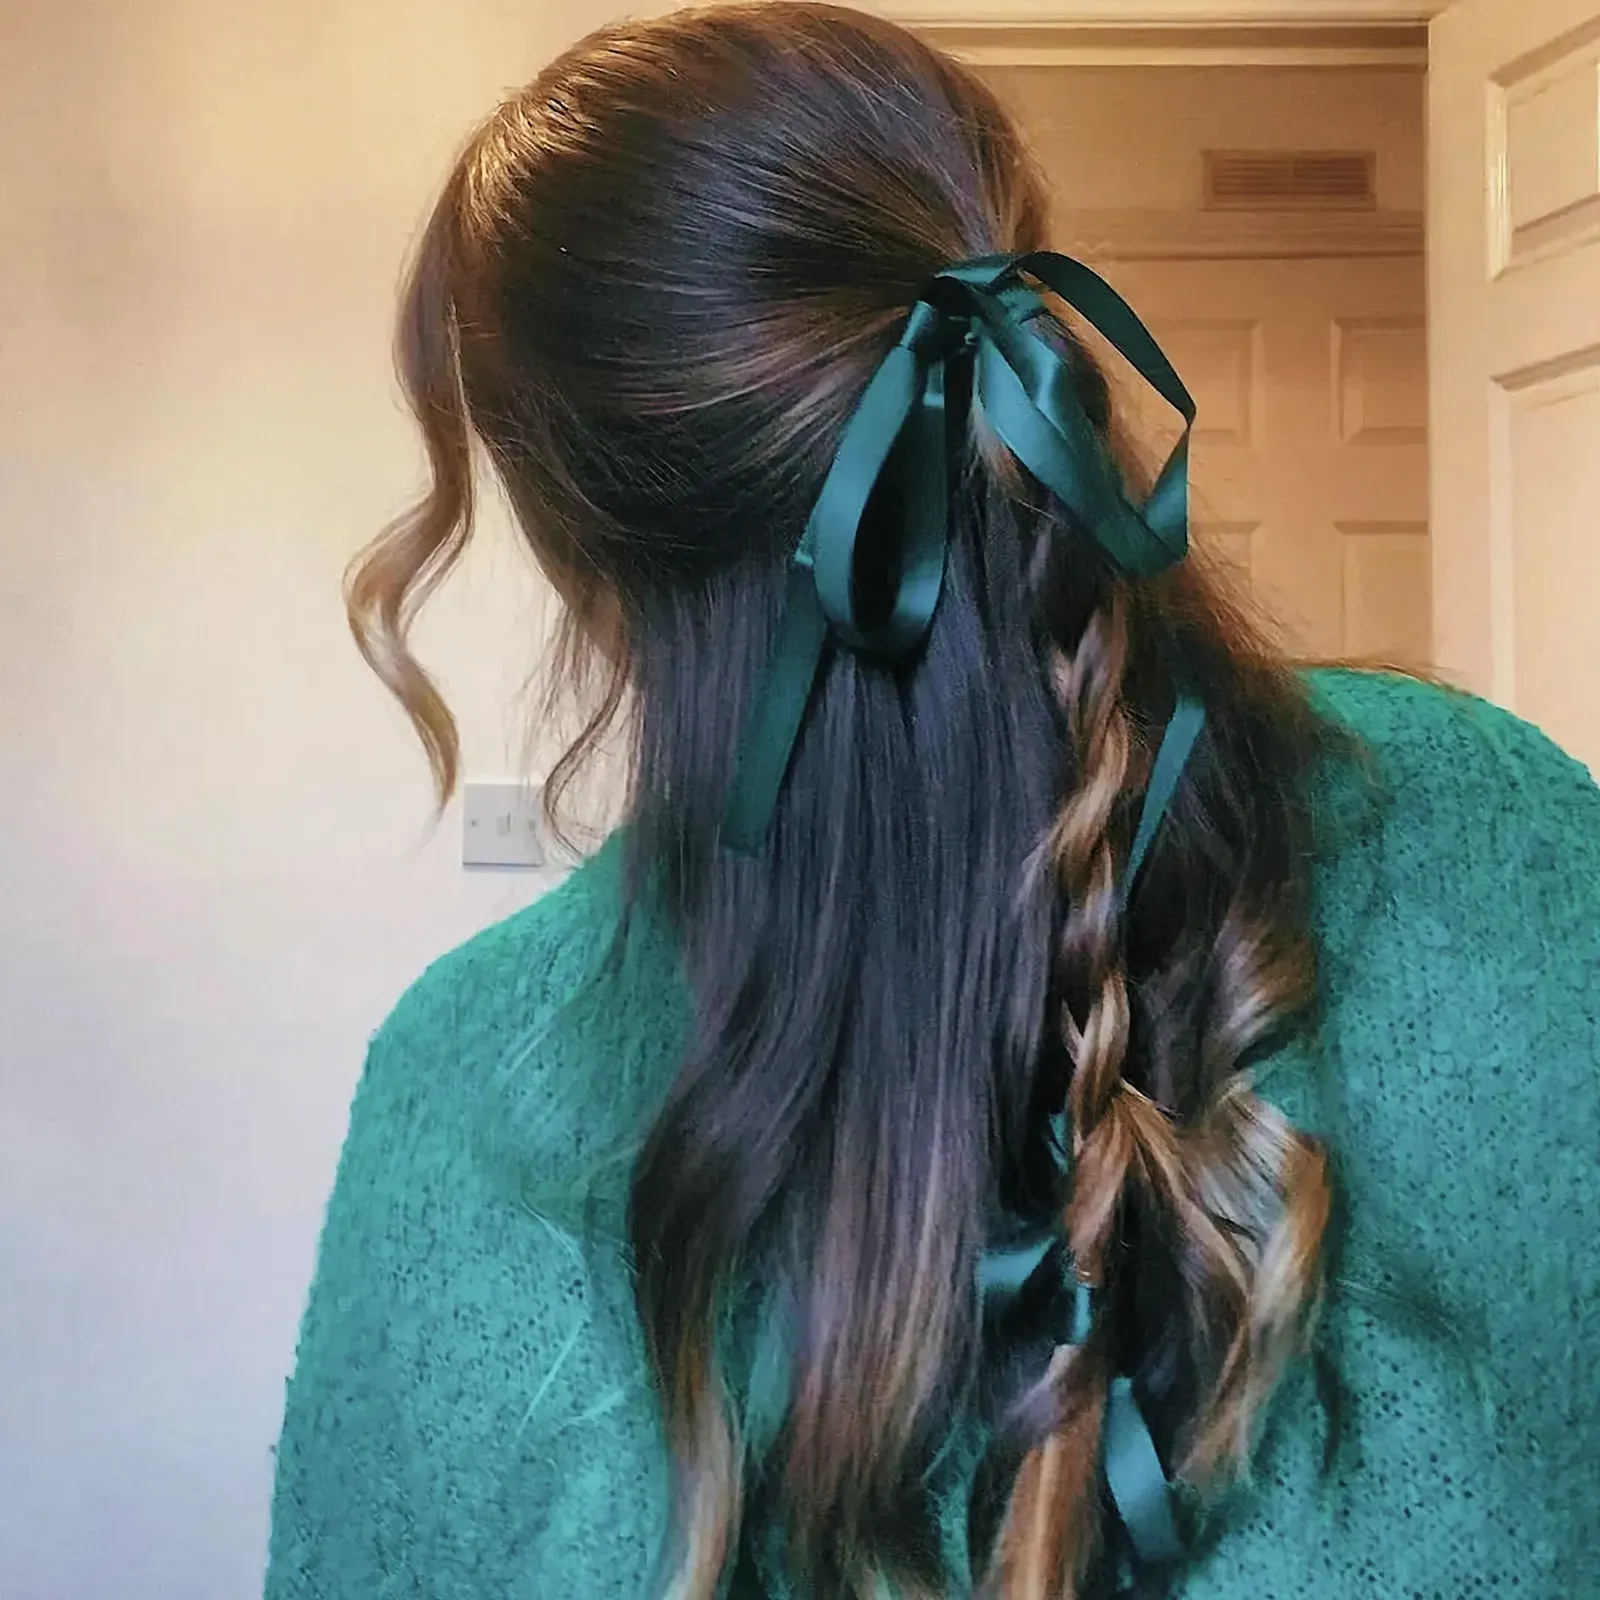 Fashionable woman with elaborate hairstyle and green bow hair accessory